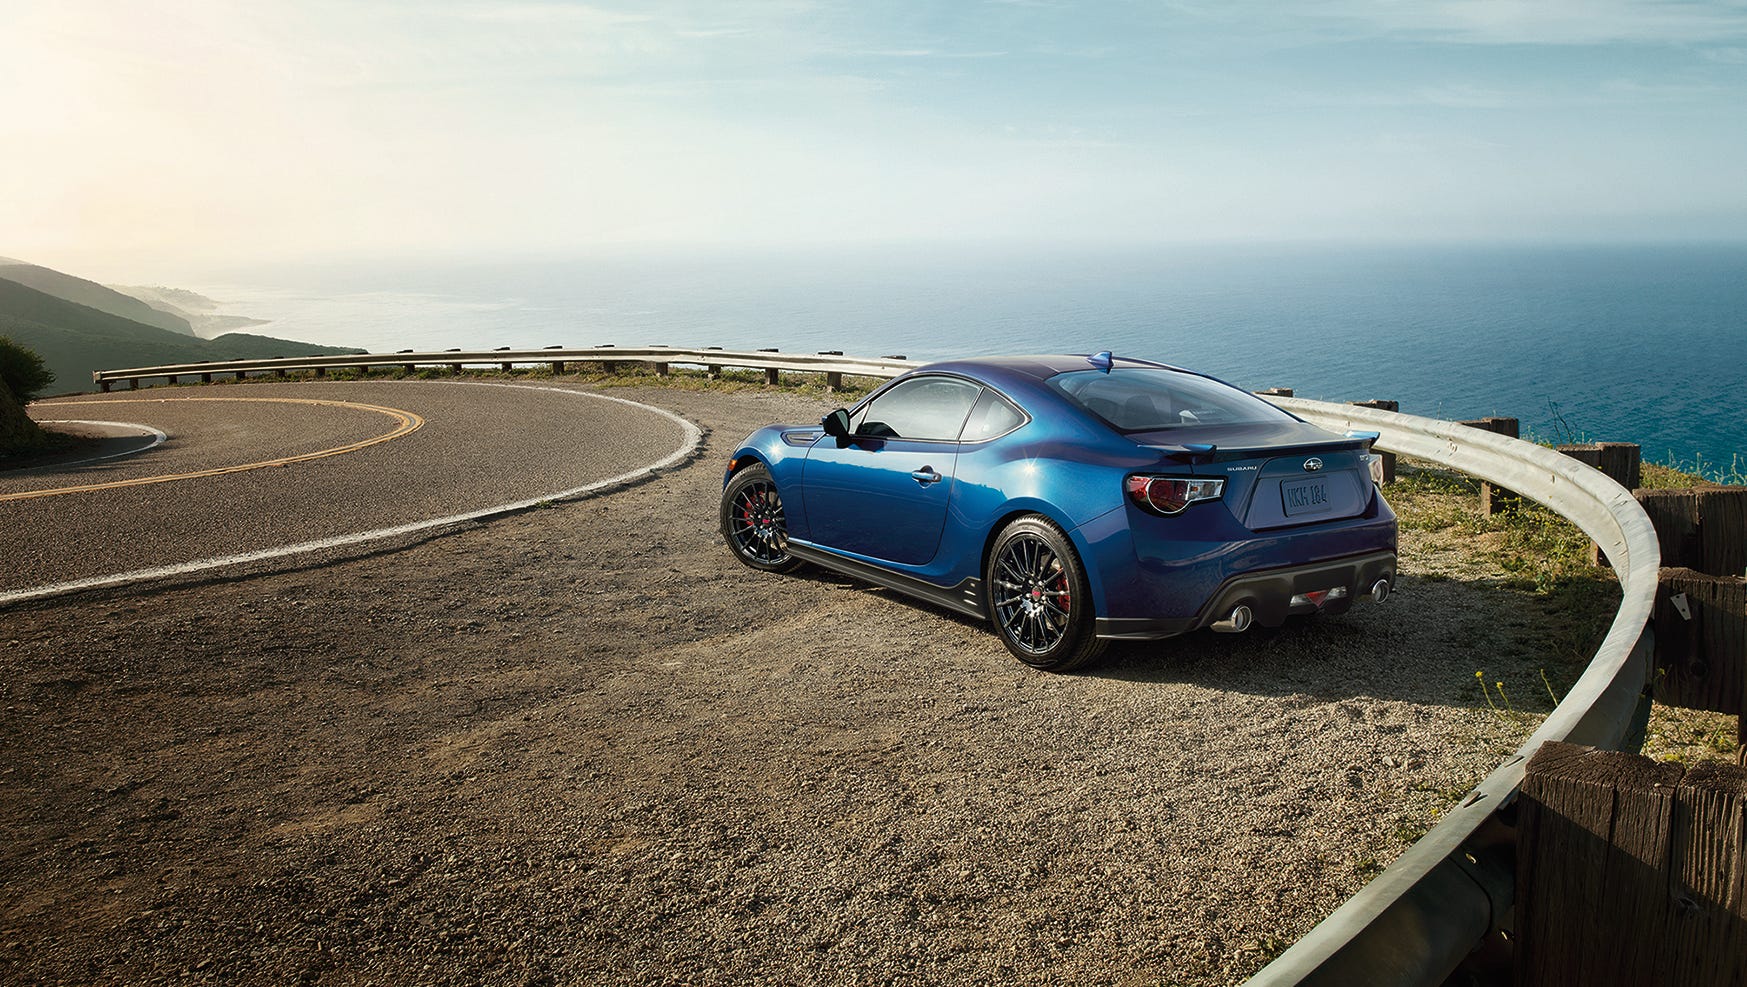 Auto review: Why is the 2015 Subaru BRZ so blue?